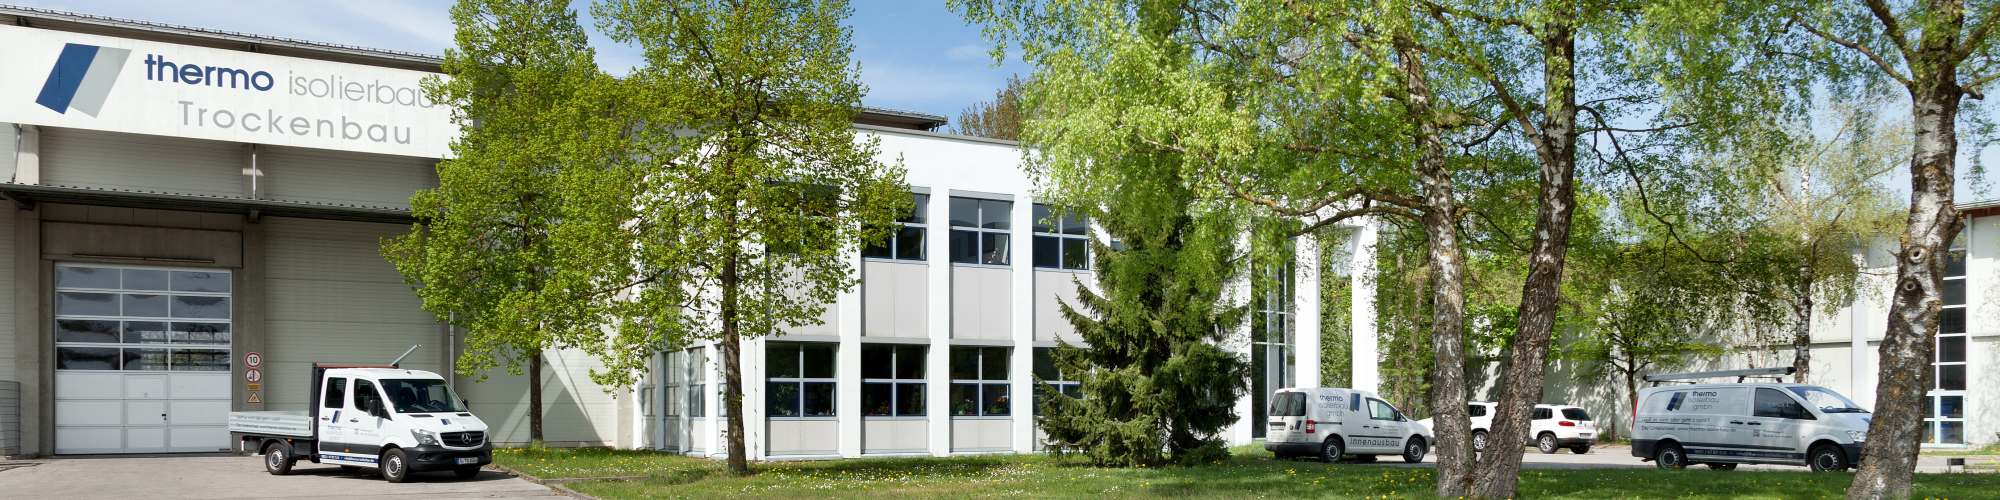 thermo isolierbau GmbH